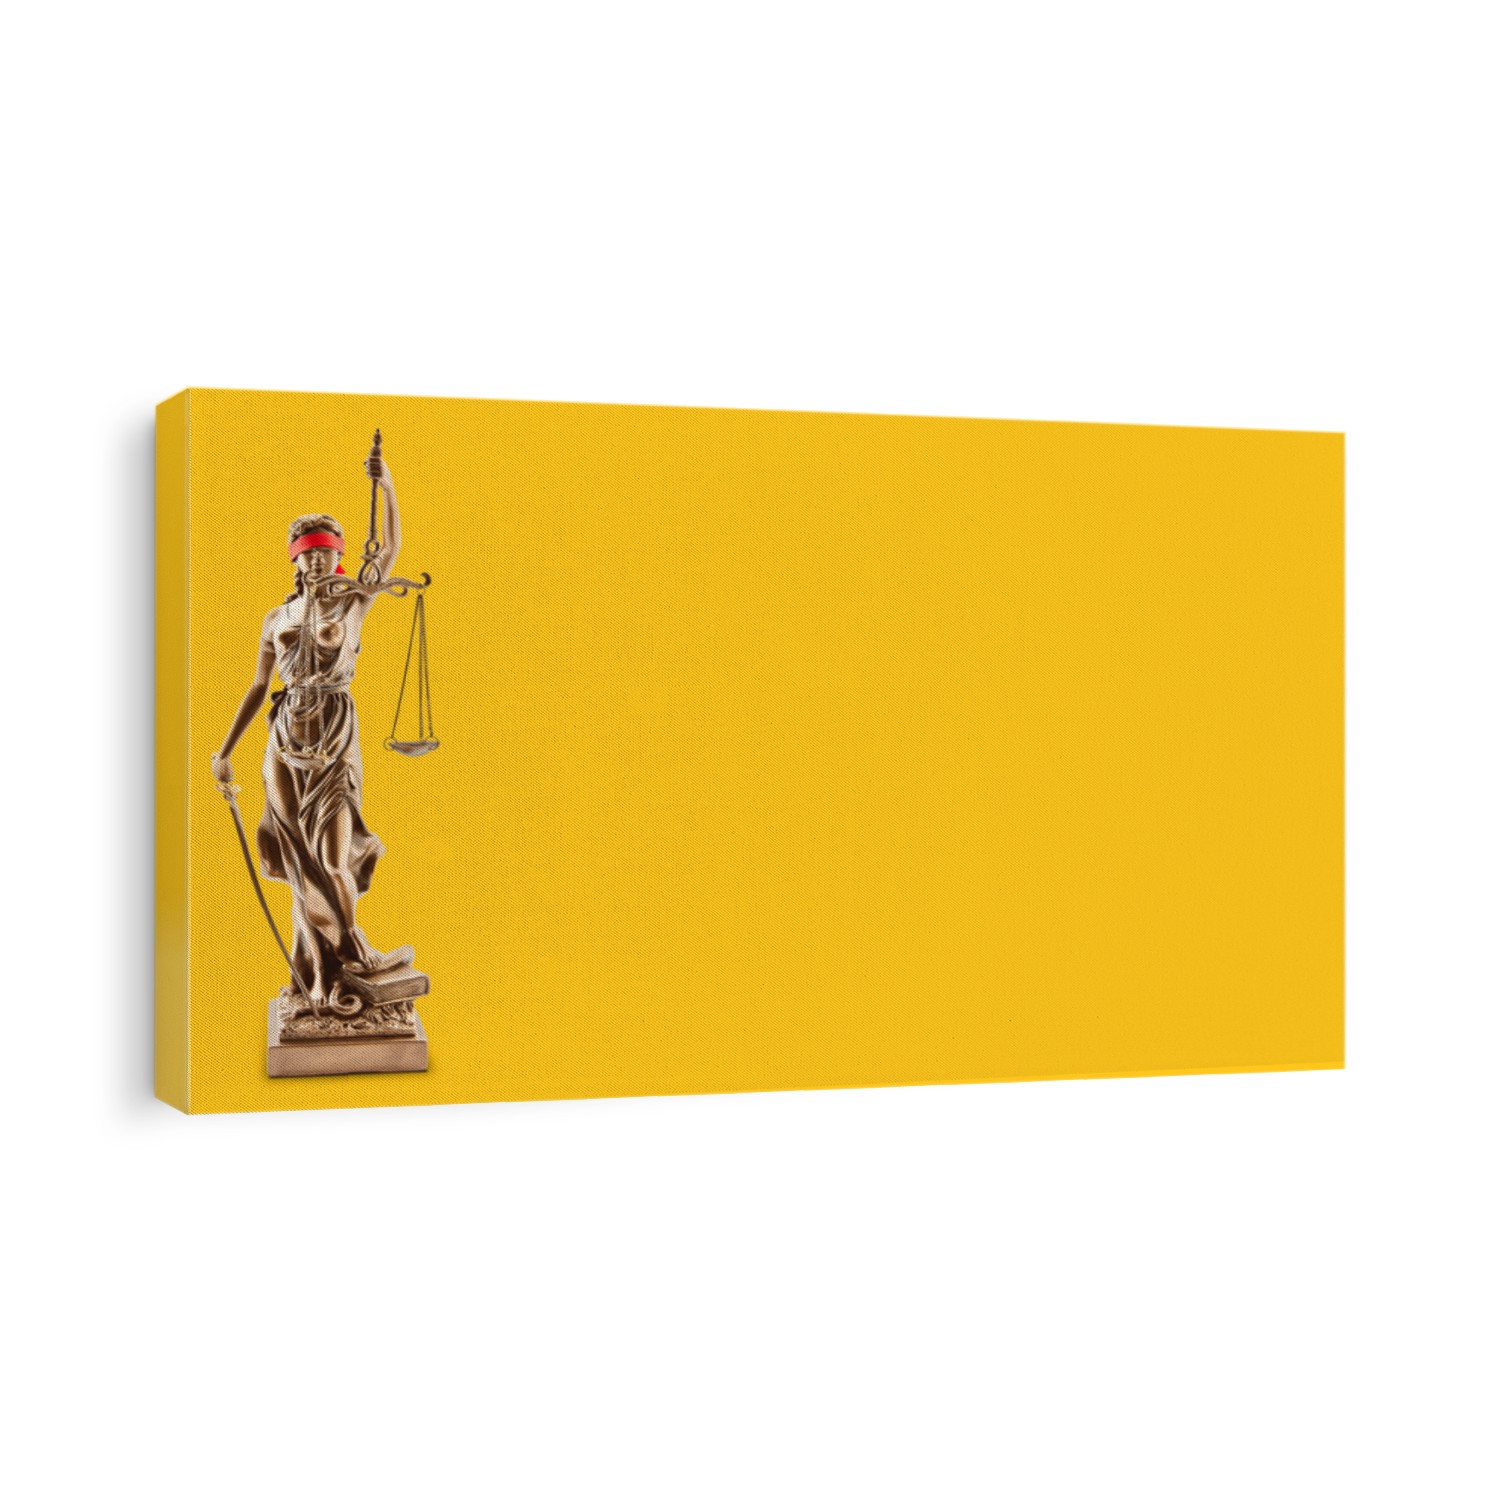 Blind lady justice with blindfold against yellow background with copy space as law concept